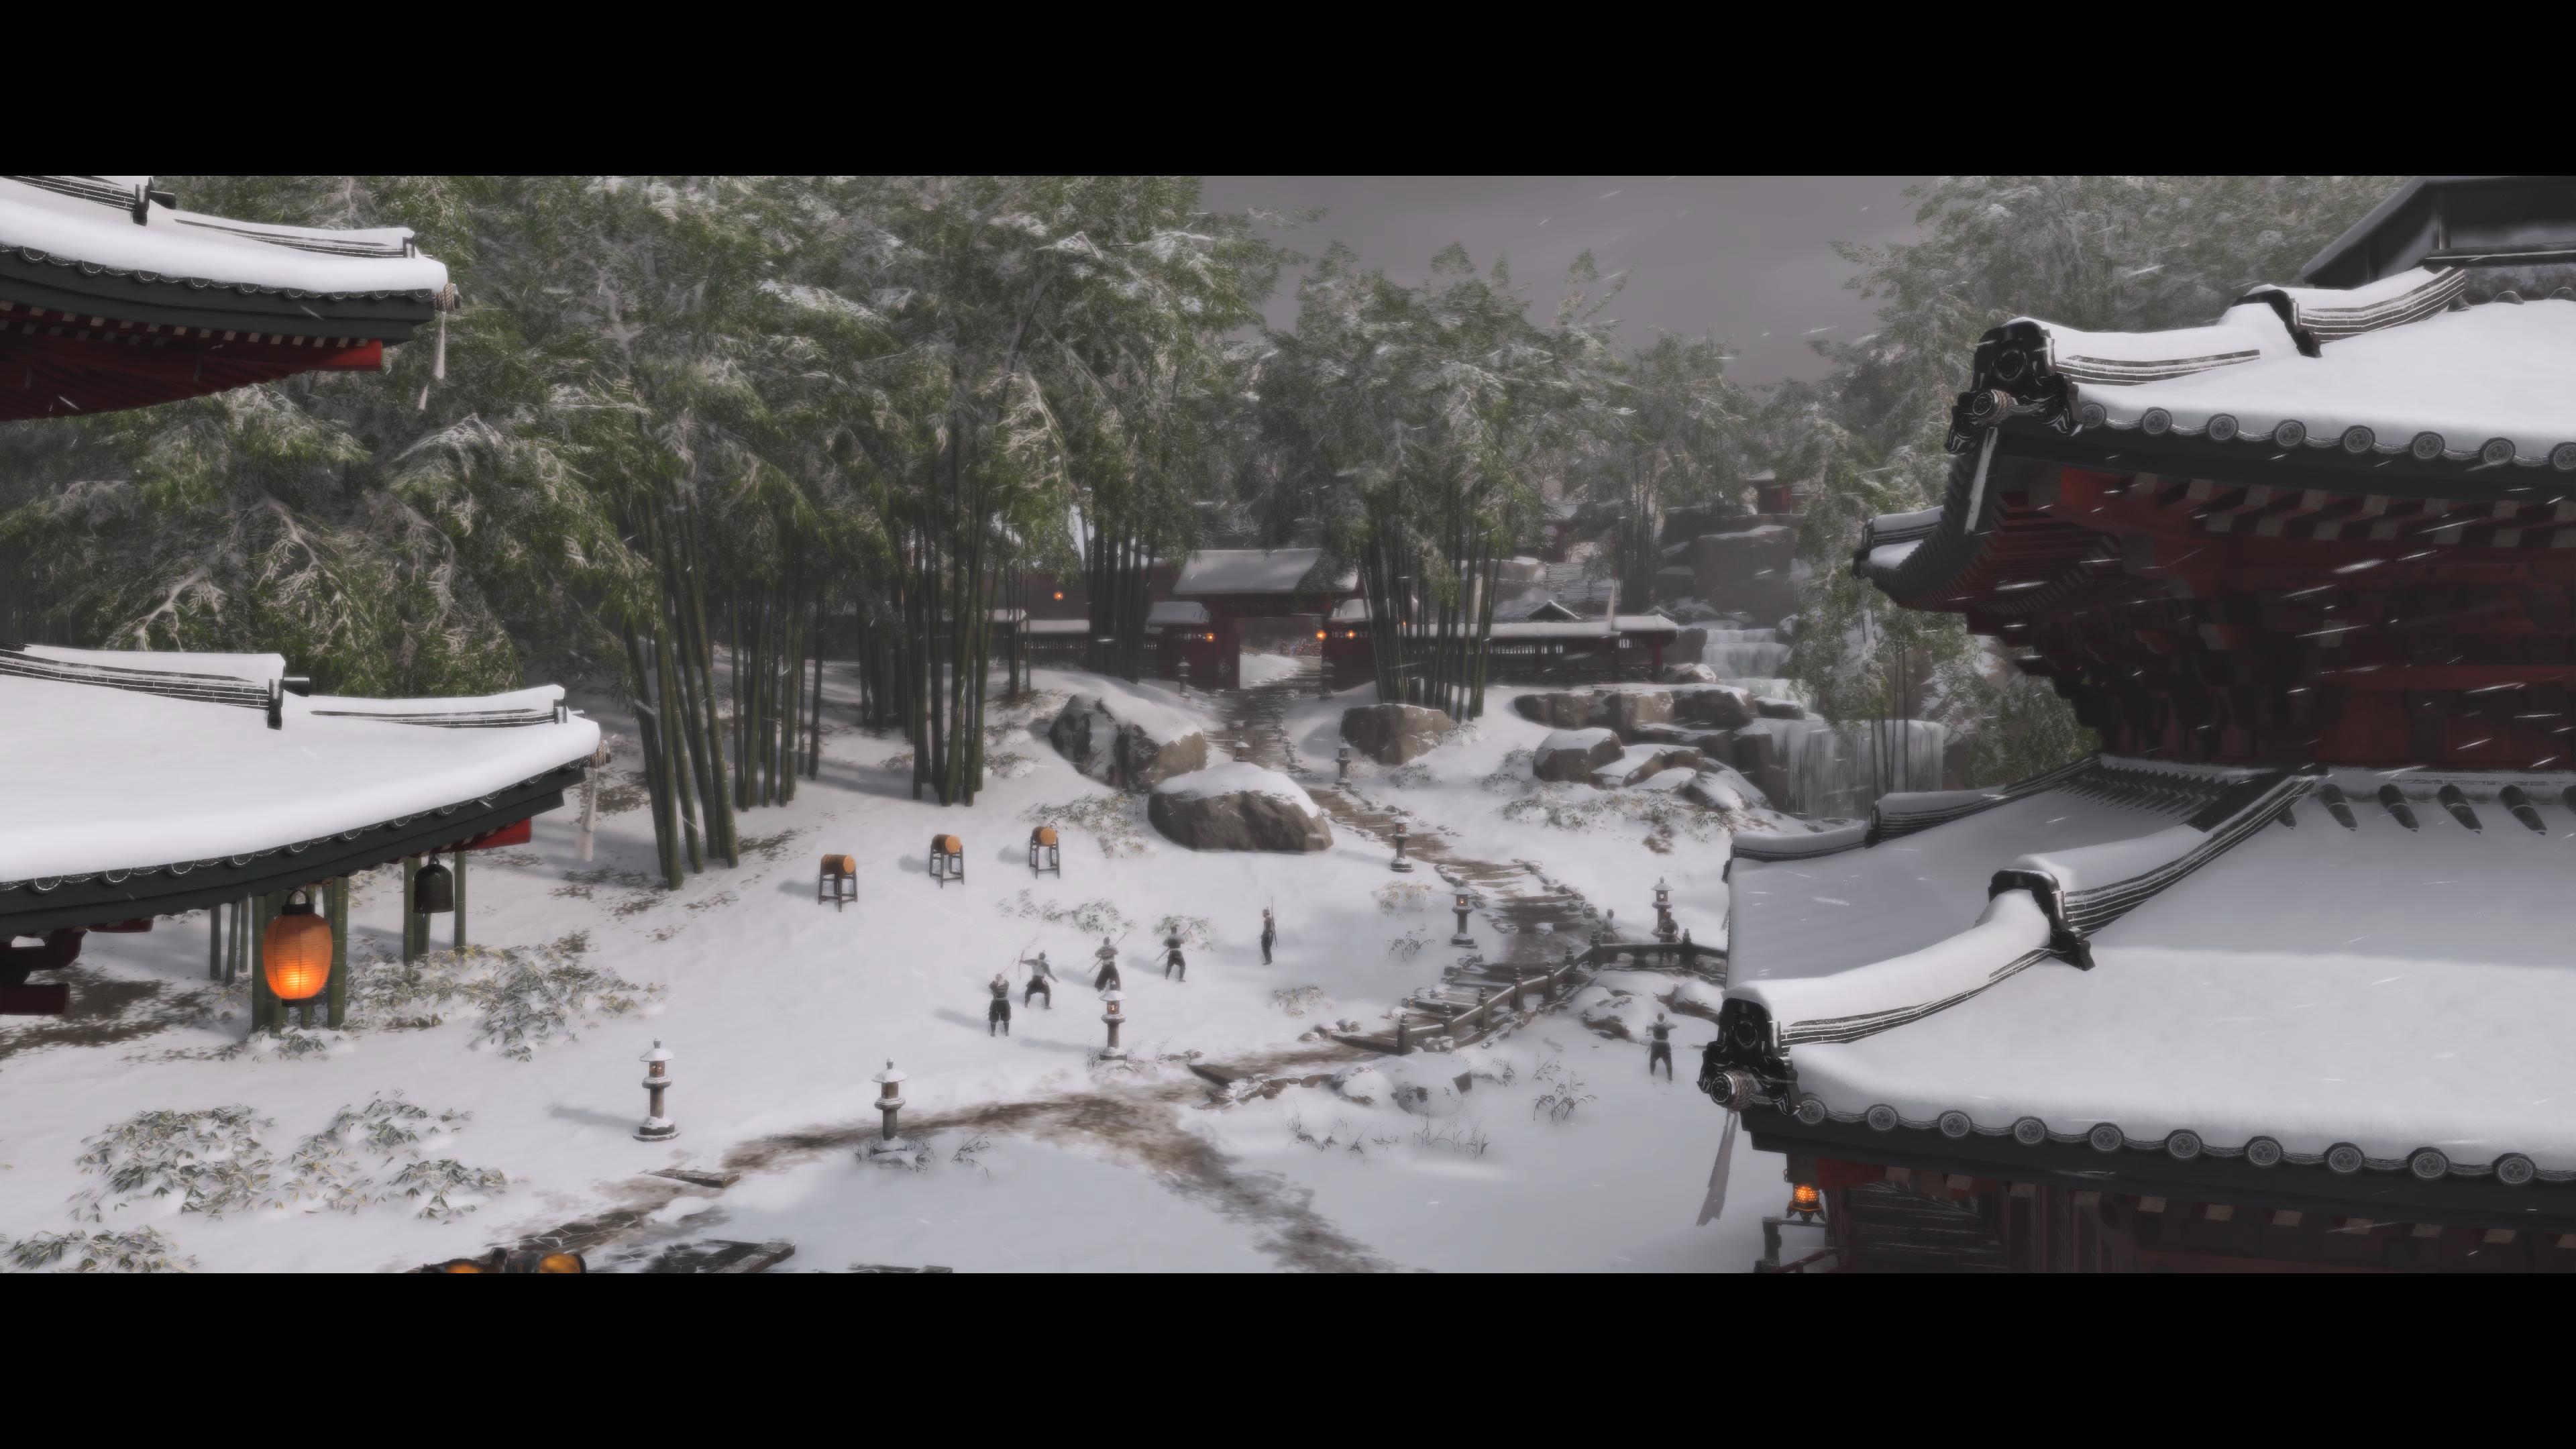 Ghost Of Tsushima PlayStation Video Games Snow Trees Building People Video Game Art 3840x2160